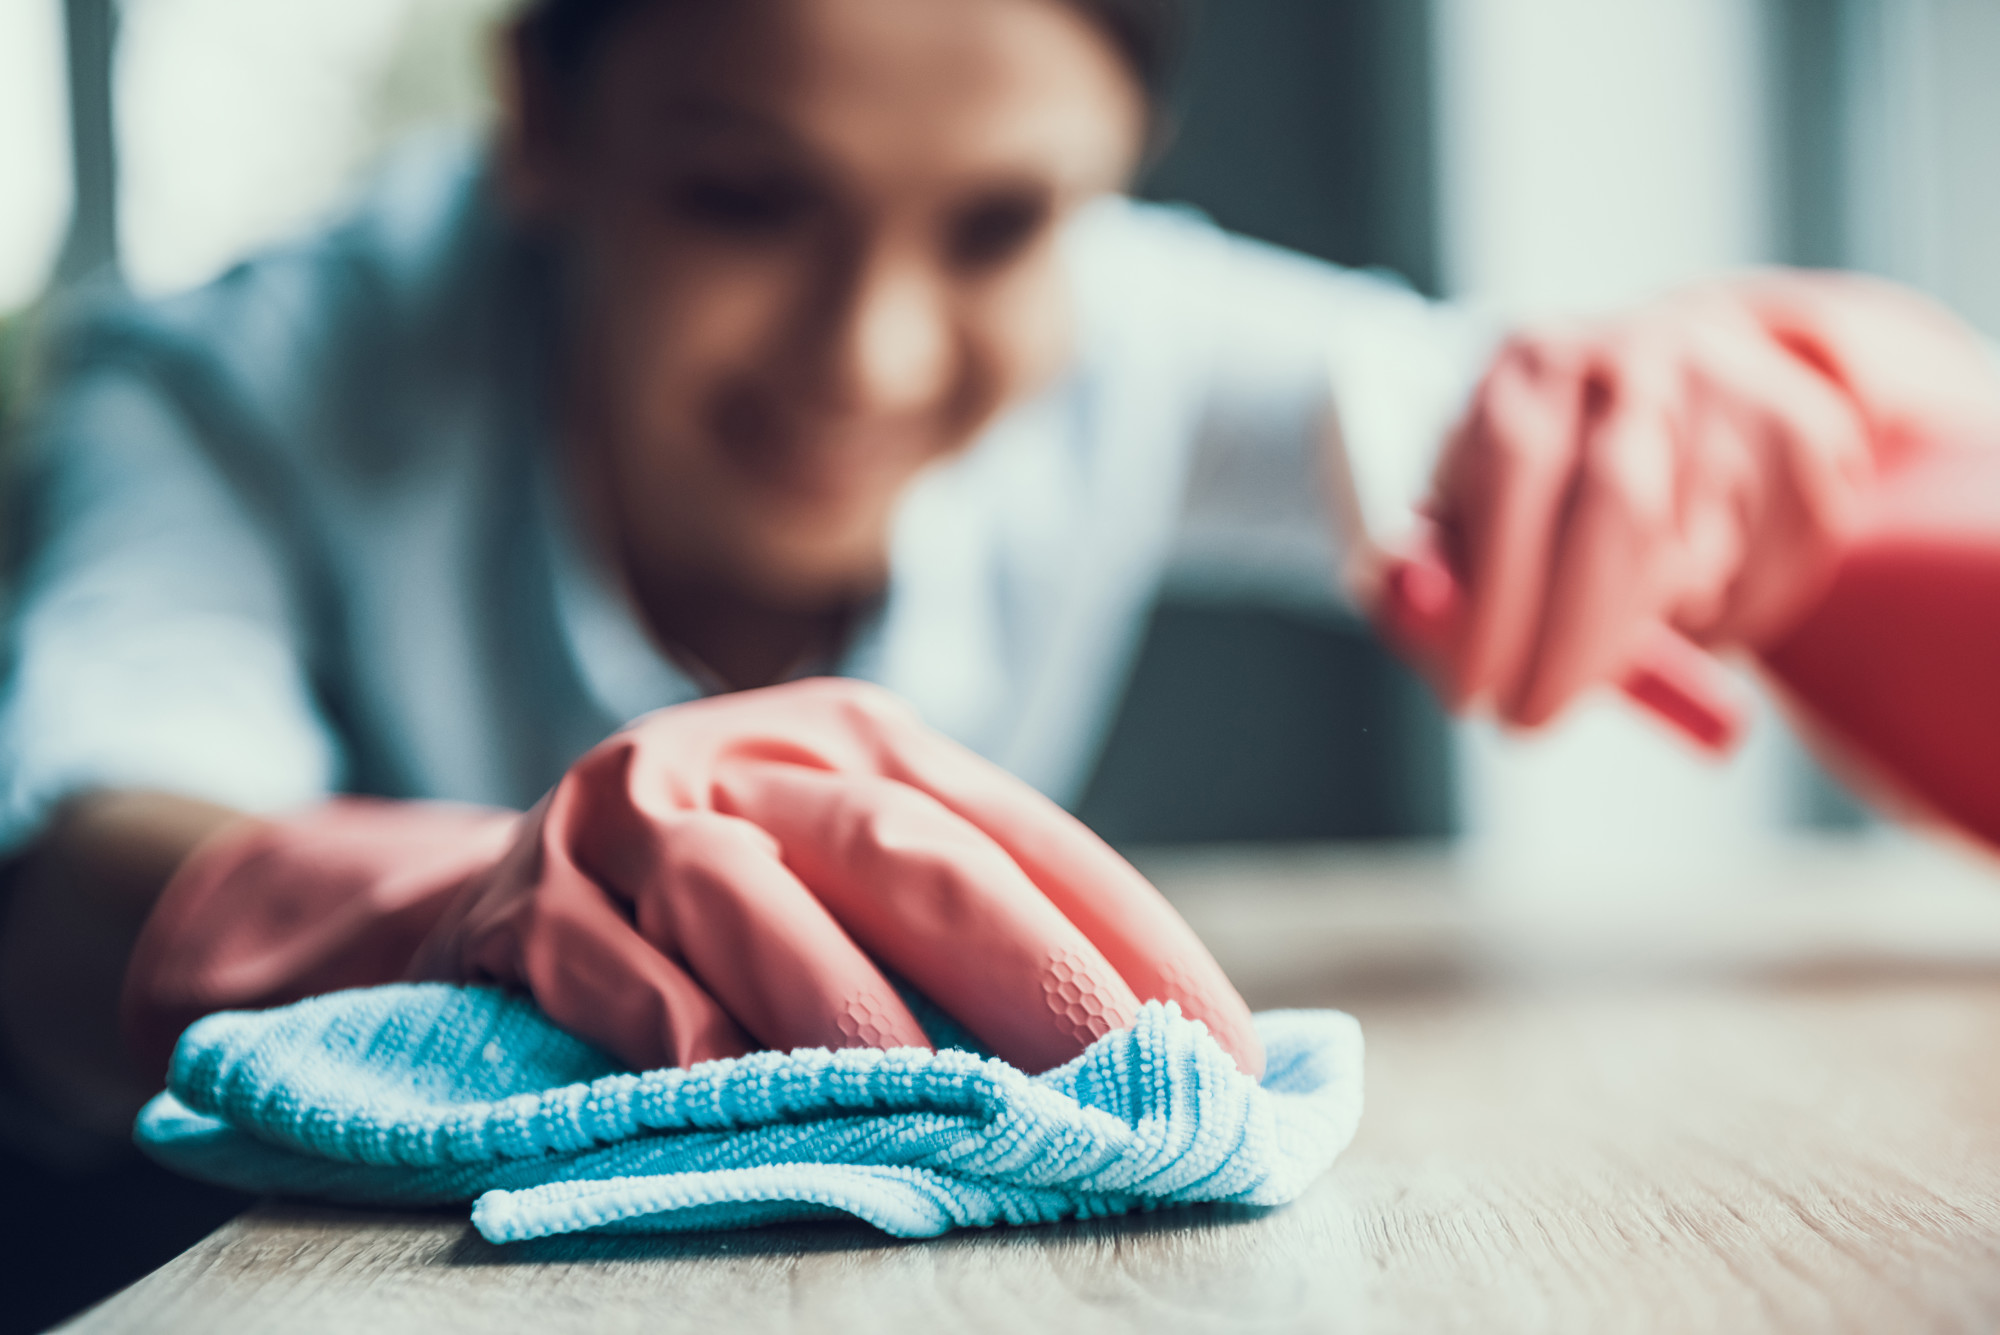 Woman cleaning with gloves on